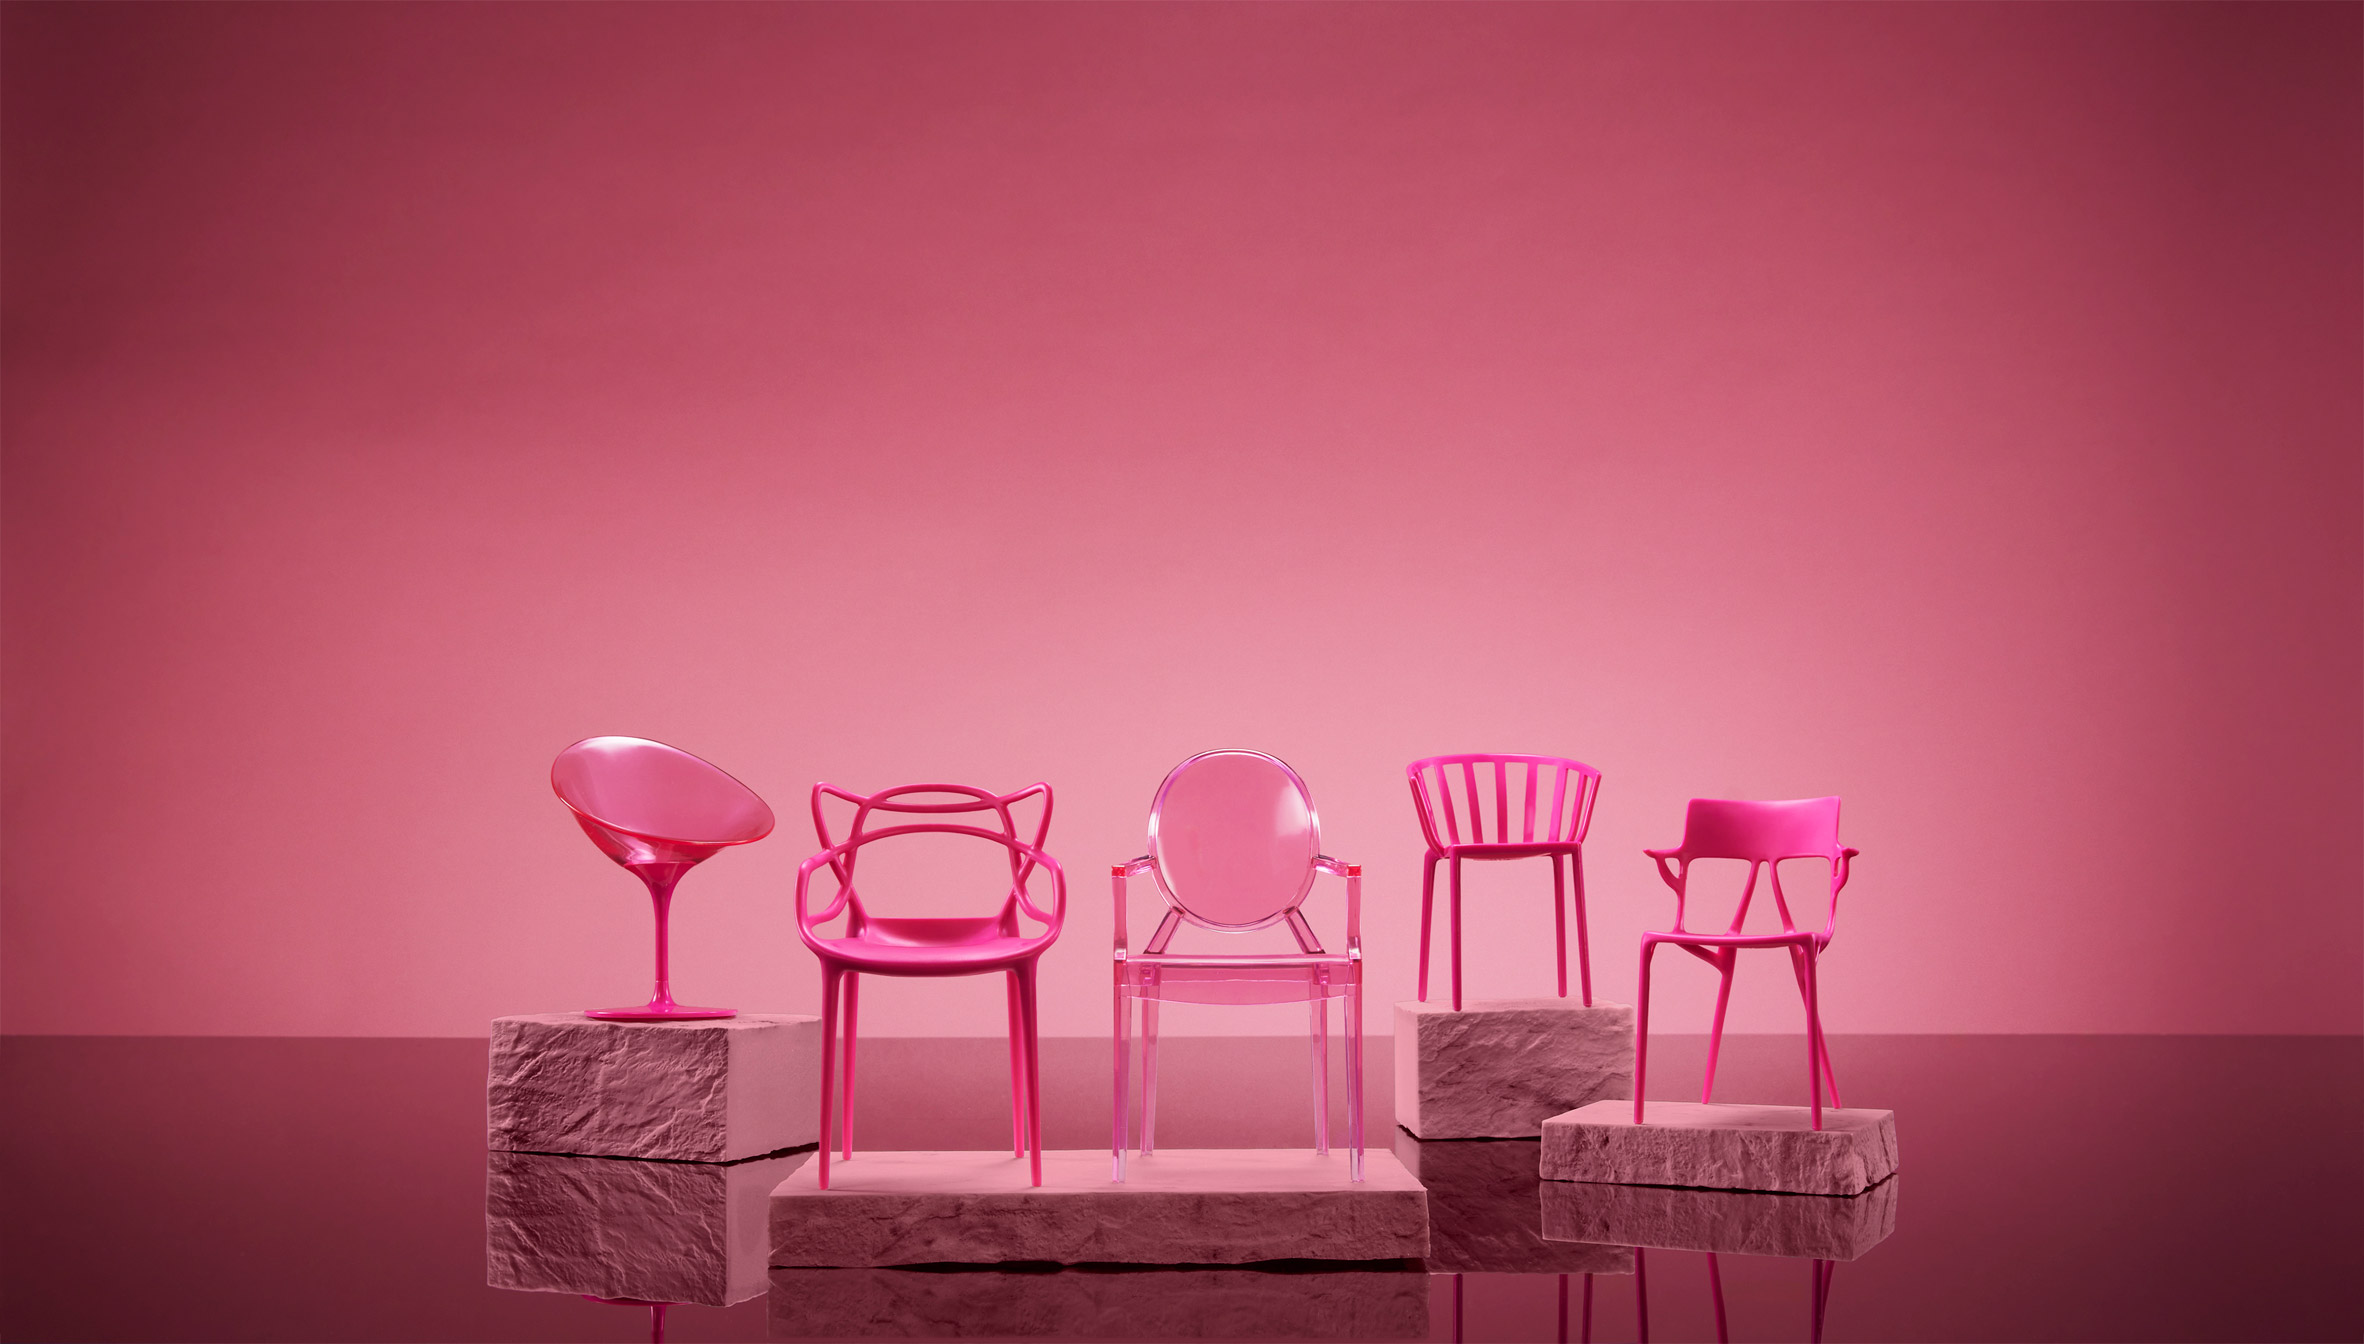 Barbie-sized pink chairs